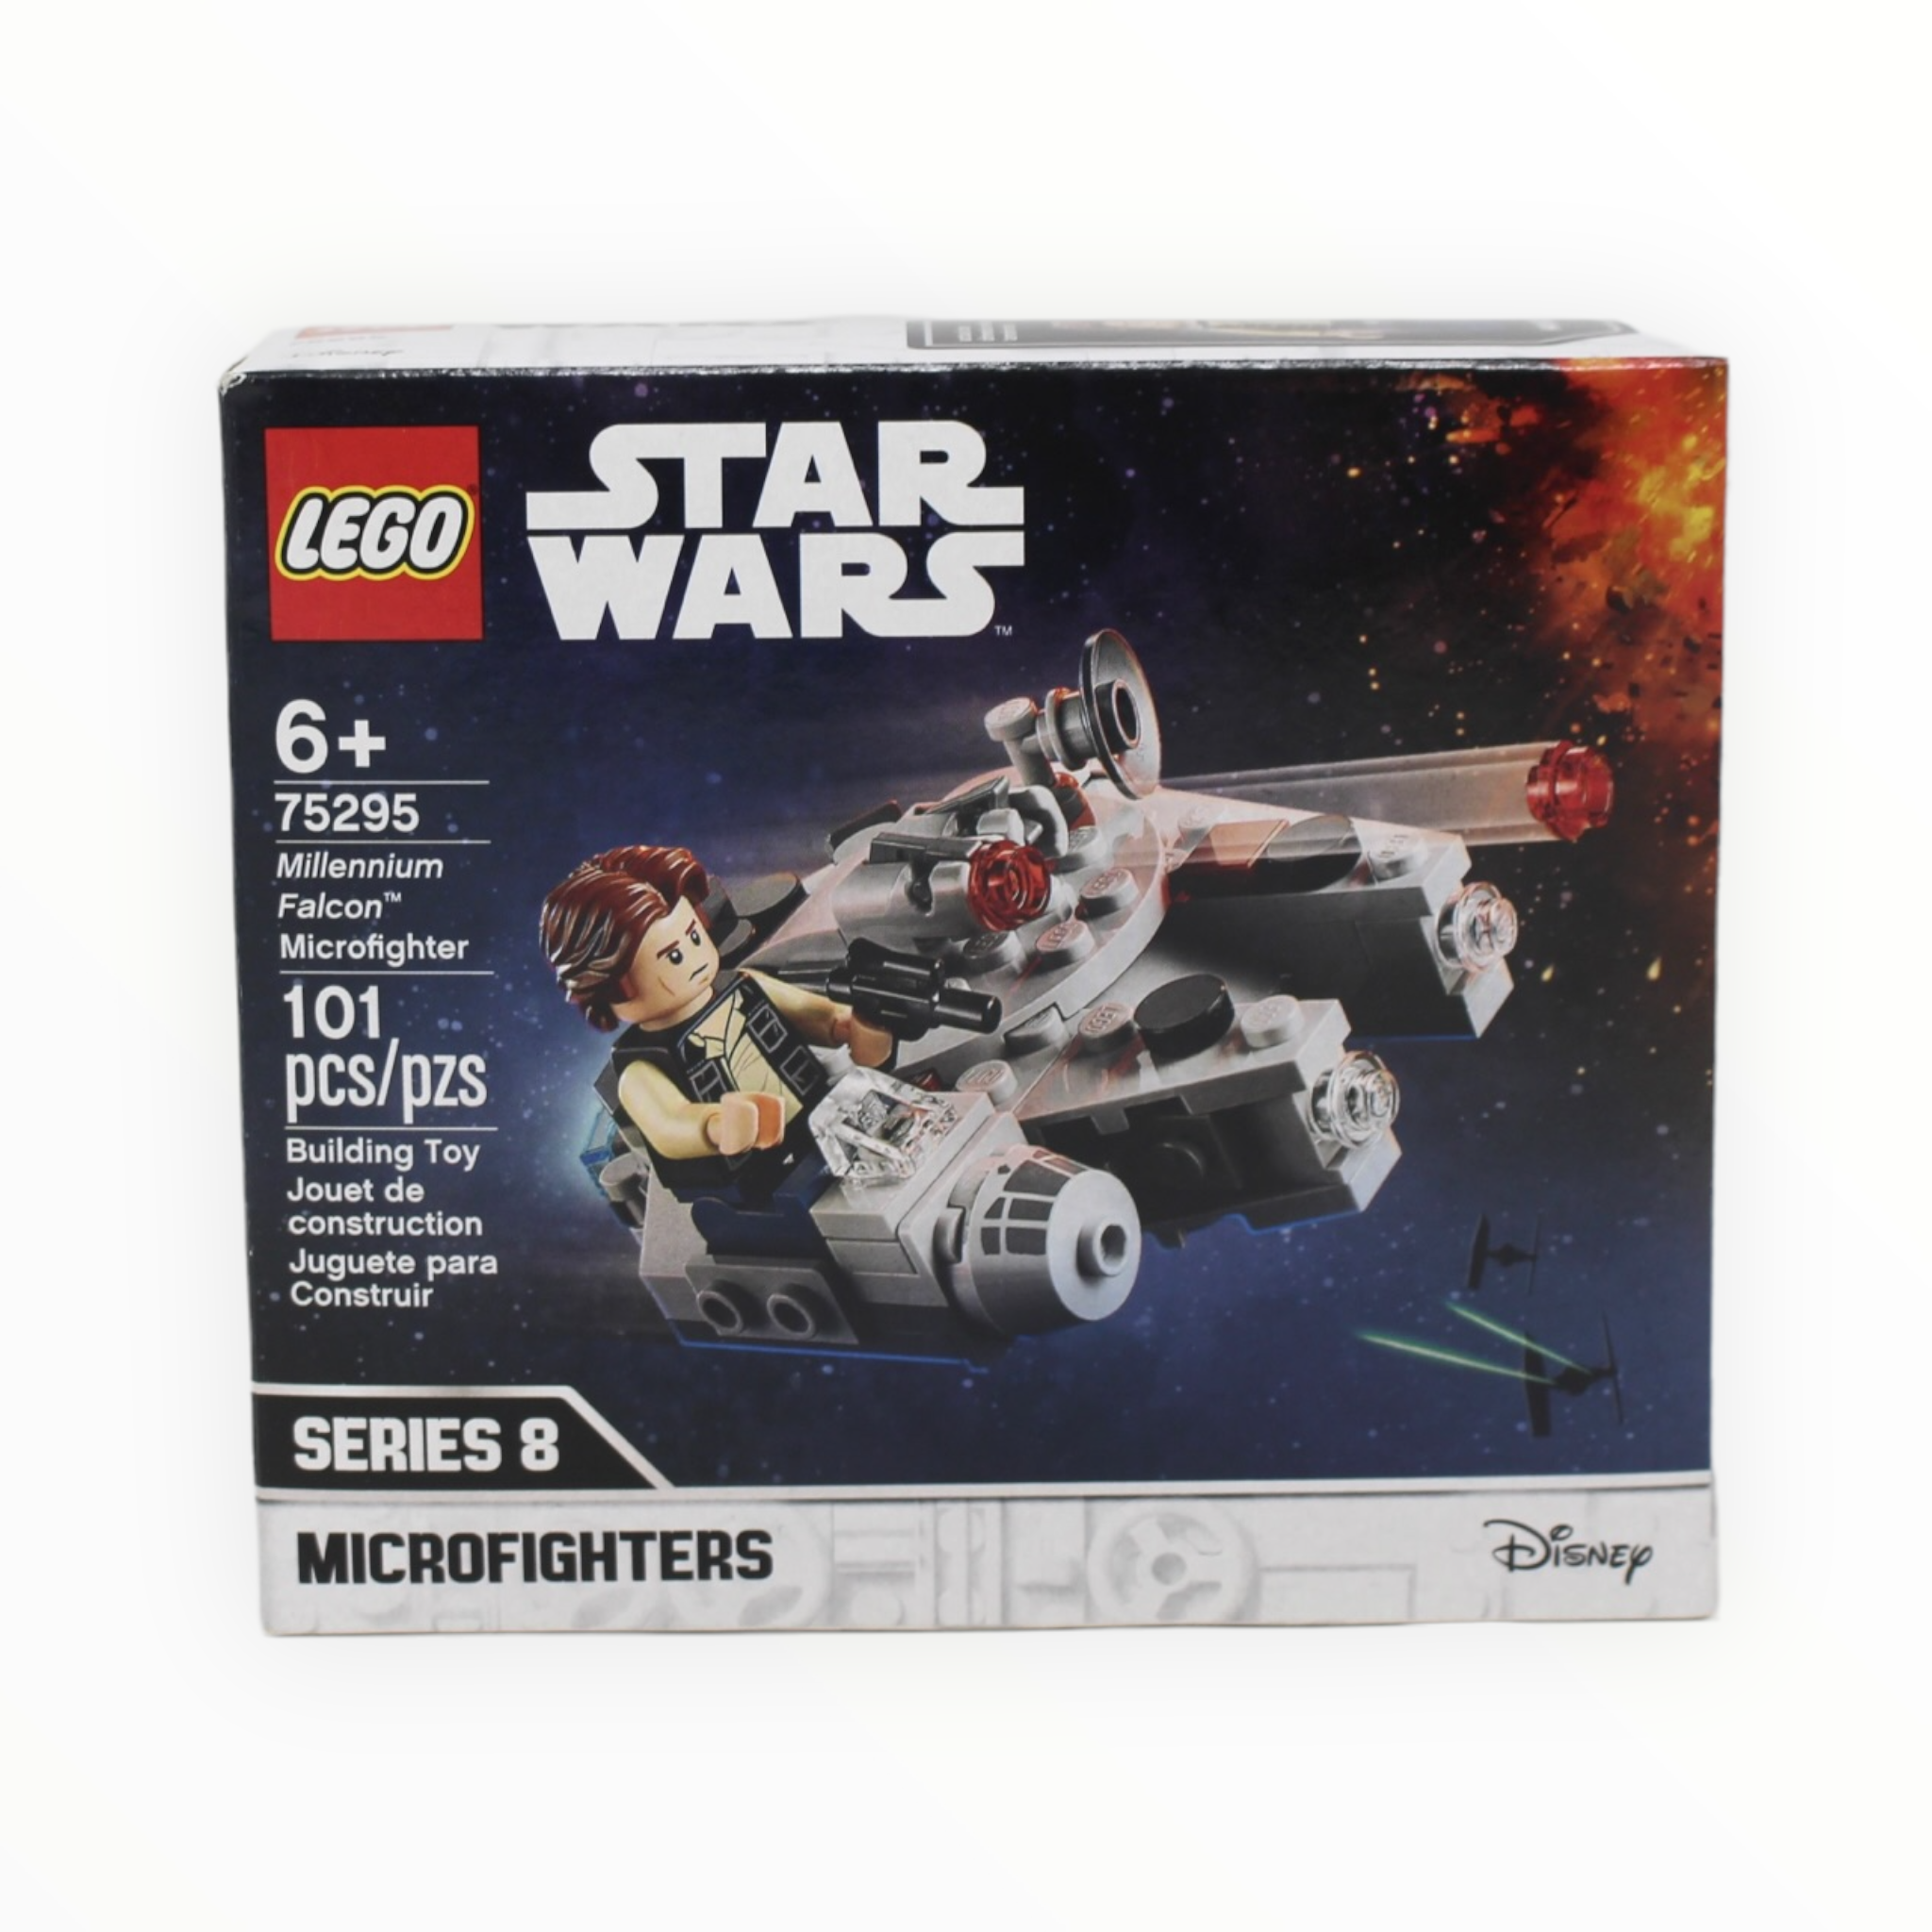 Certified Used Set 75295 Star Wars Millennium Falcon Microfighter (2021)